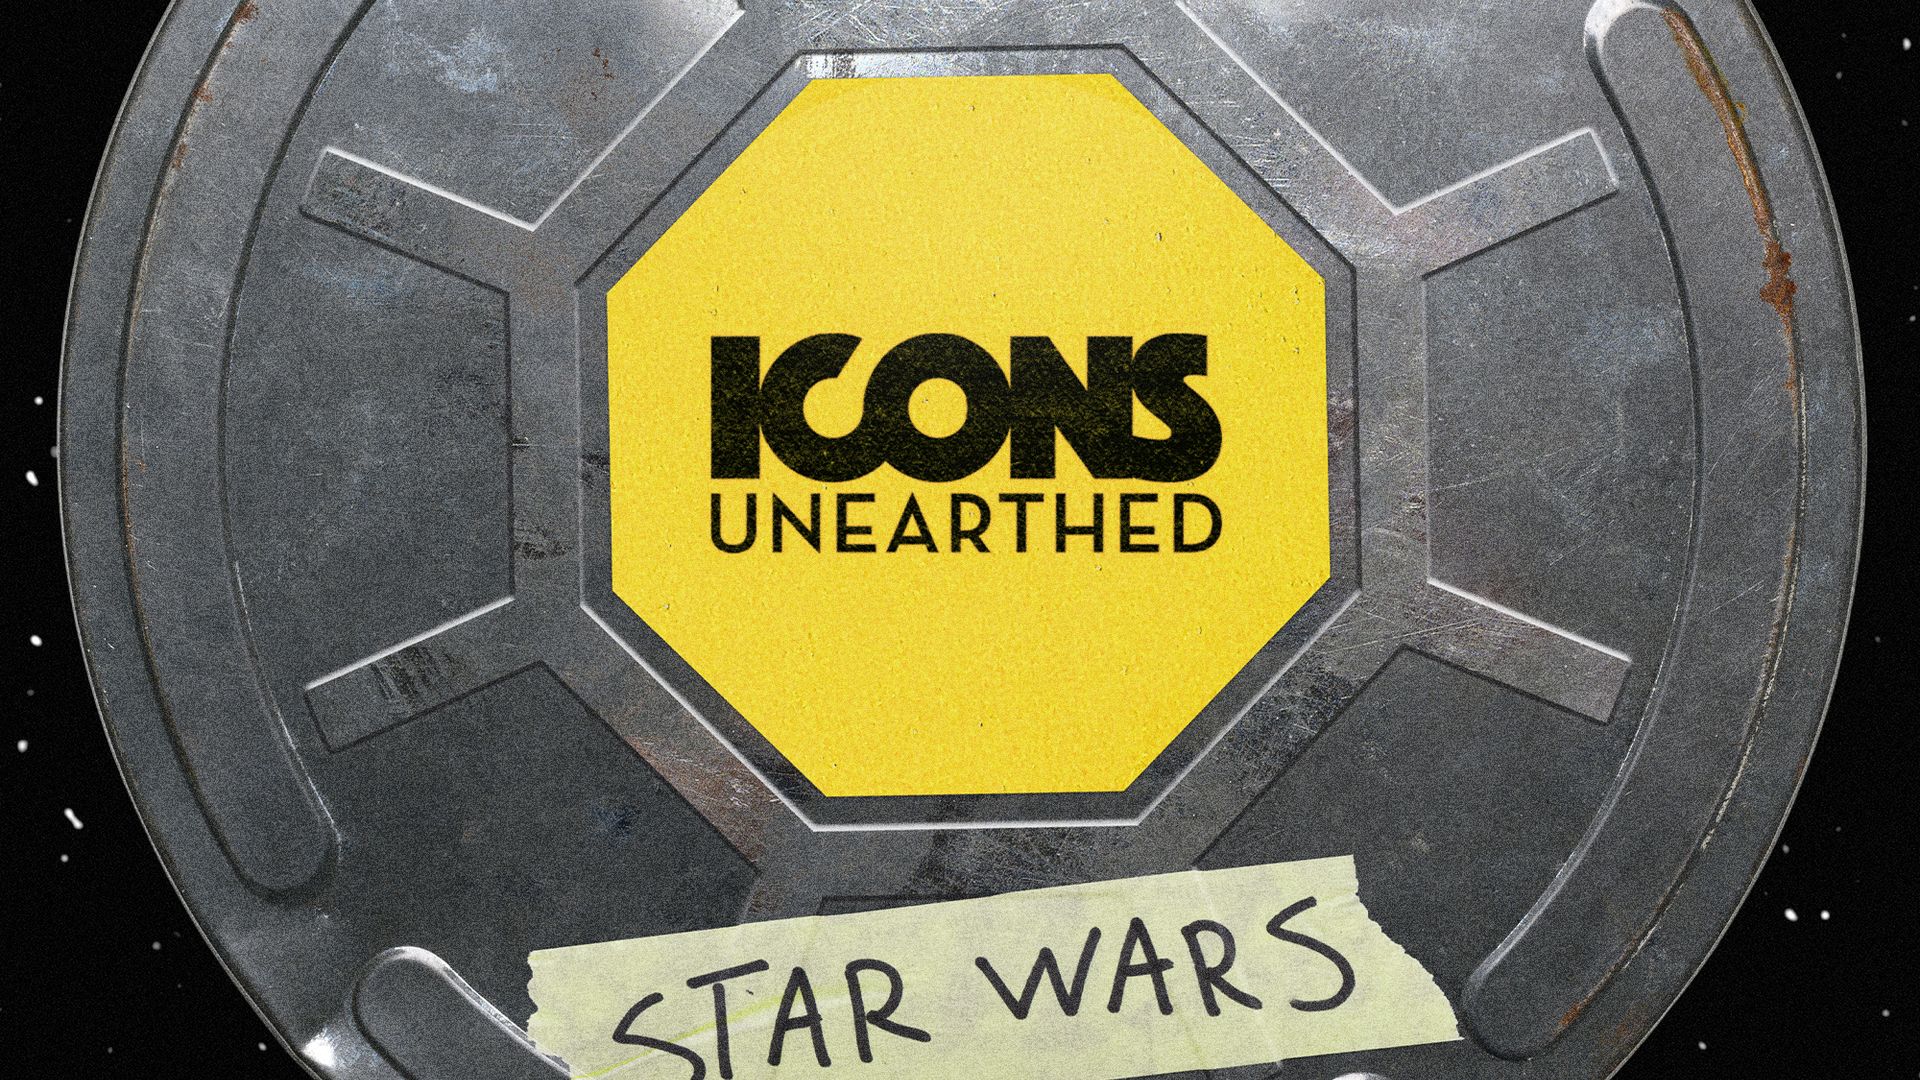 Icons Unearthed background